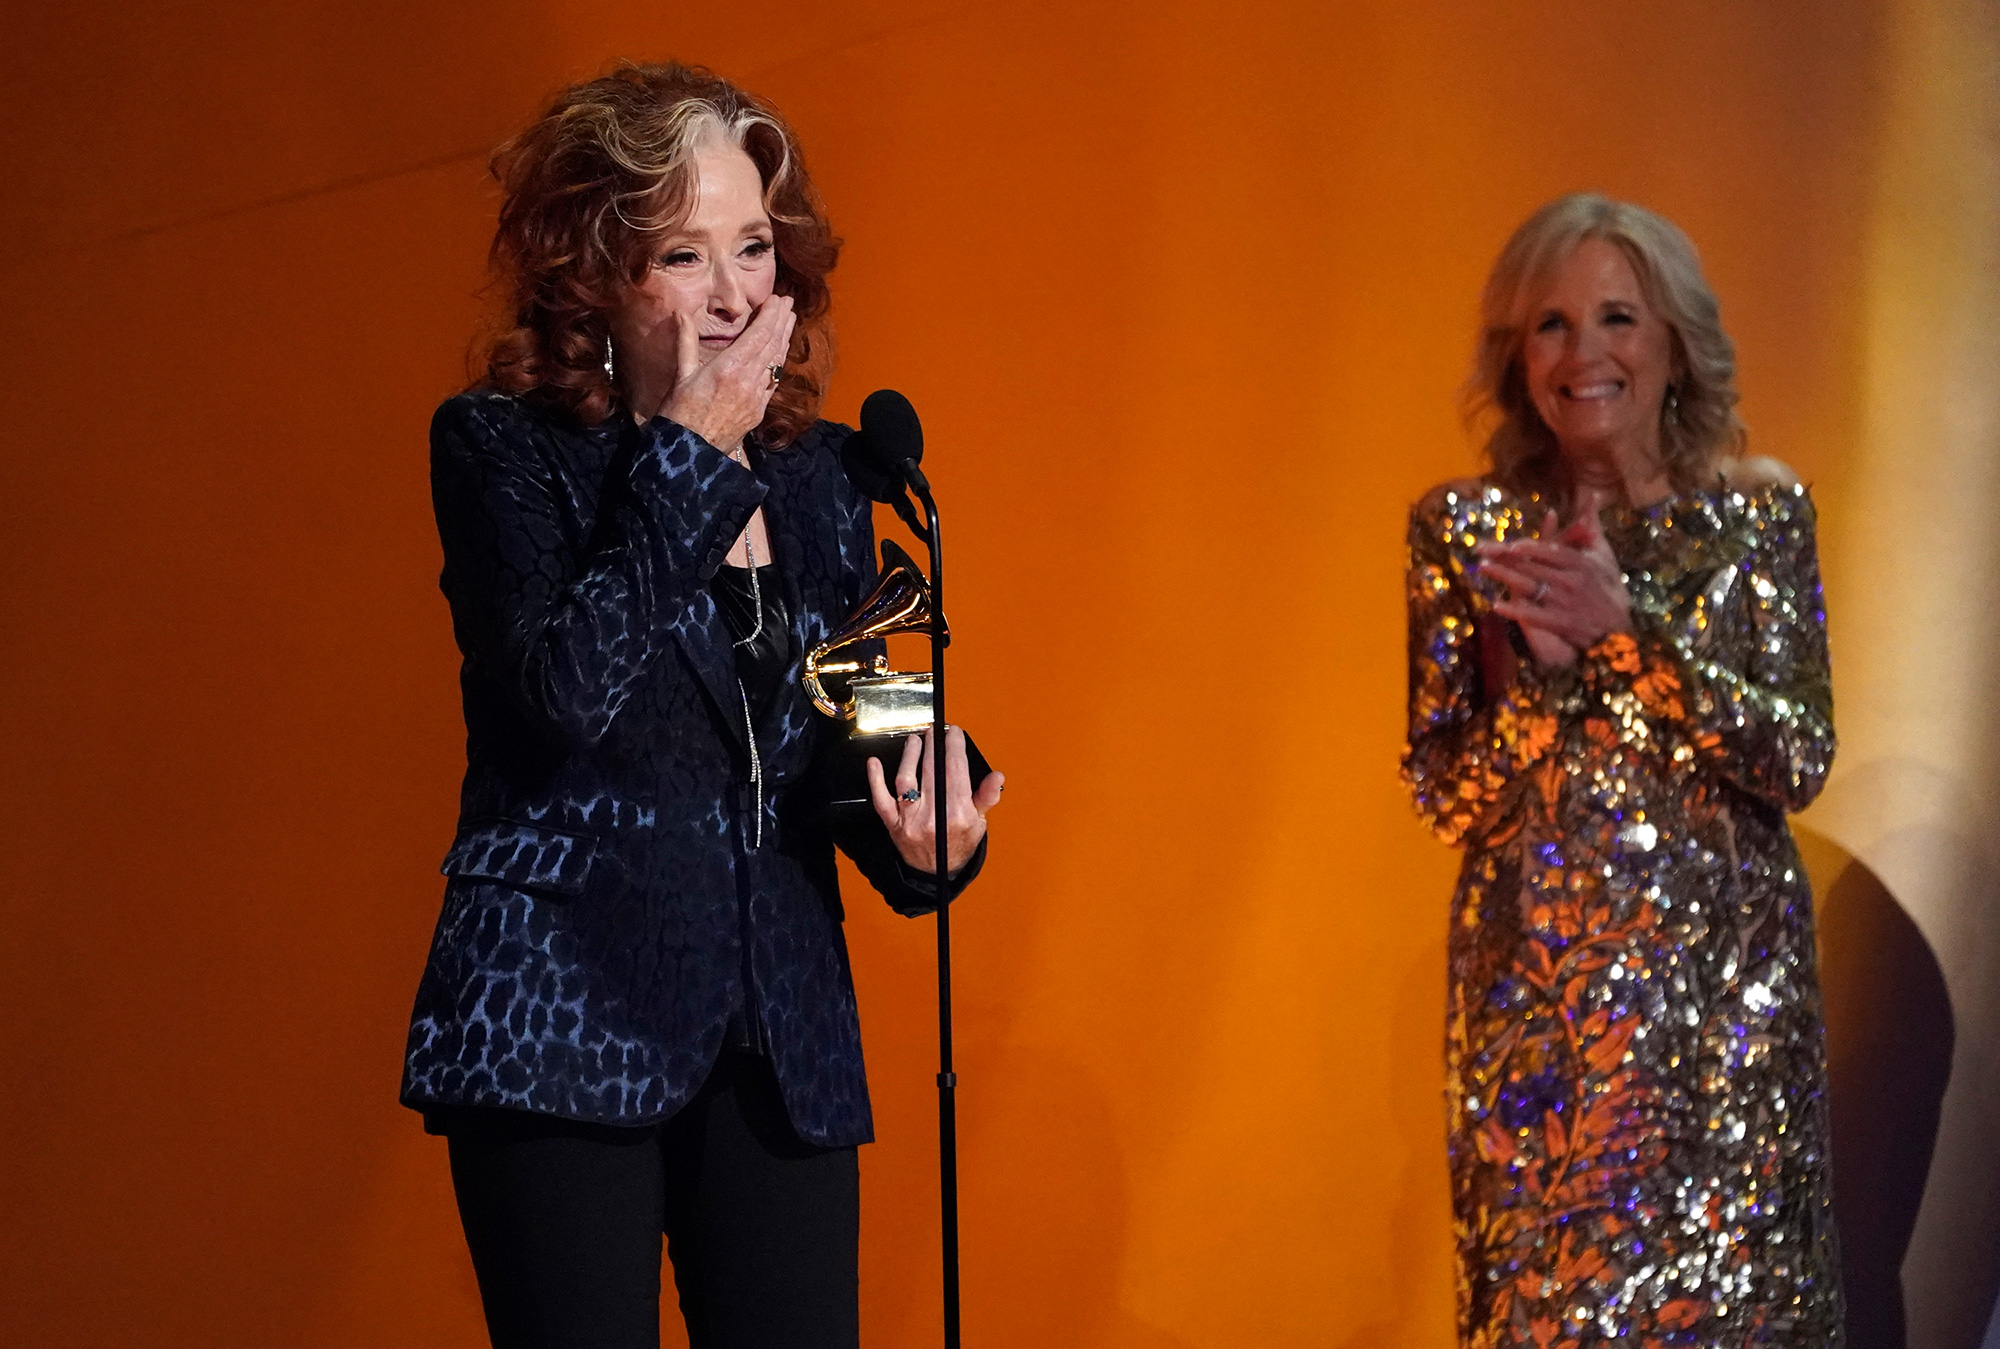 Bonnie Raitt accepts the Song Of The Year award for “Just Like That."